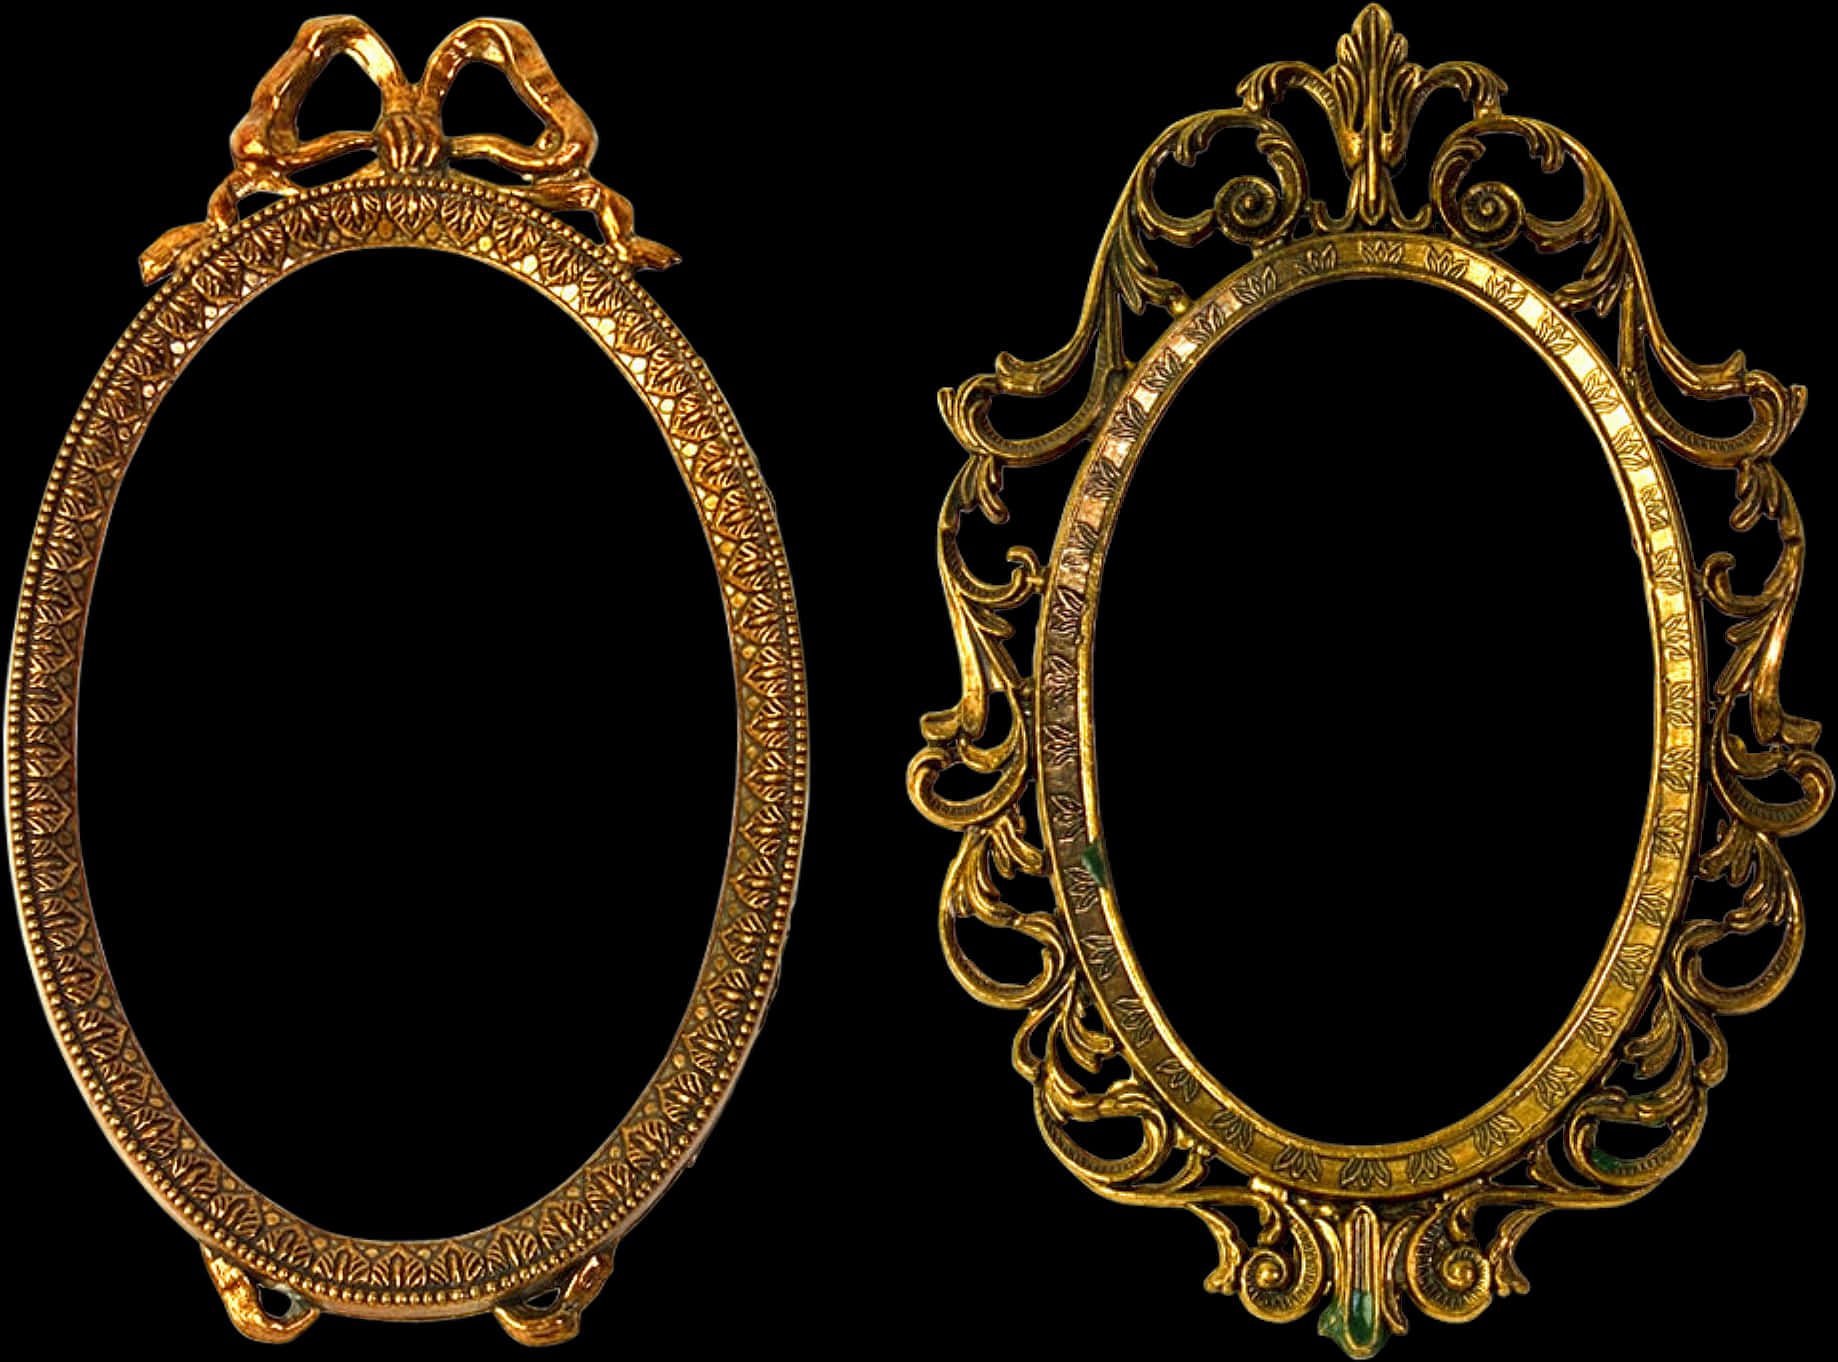 A Pair Of Oval Gold Frames